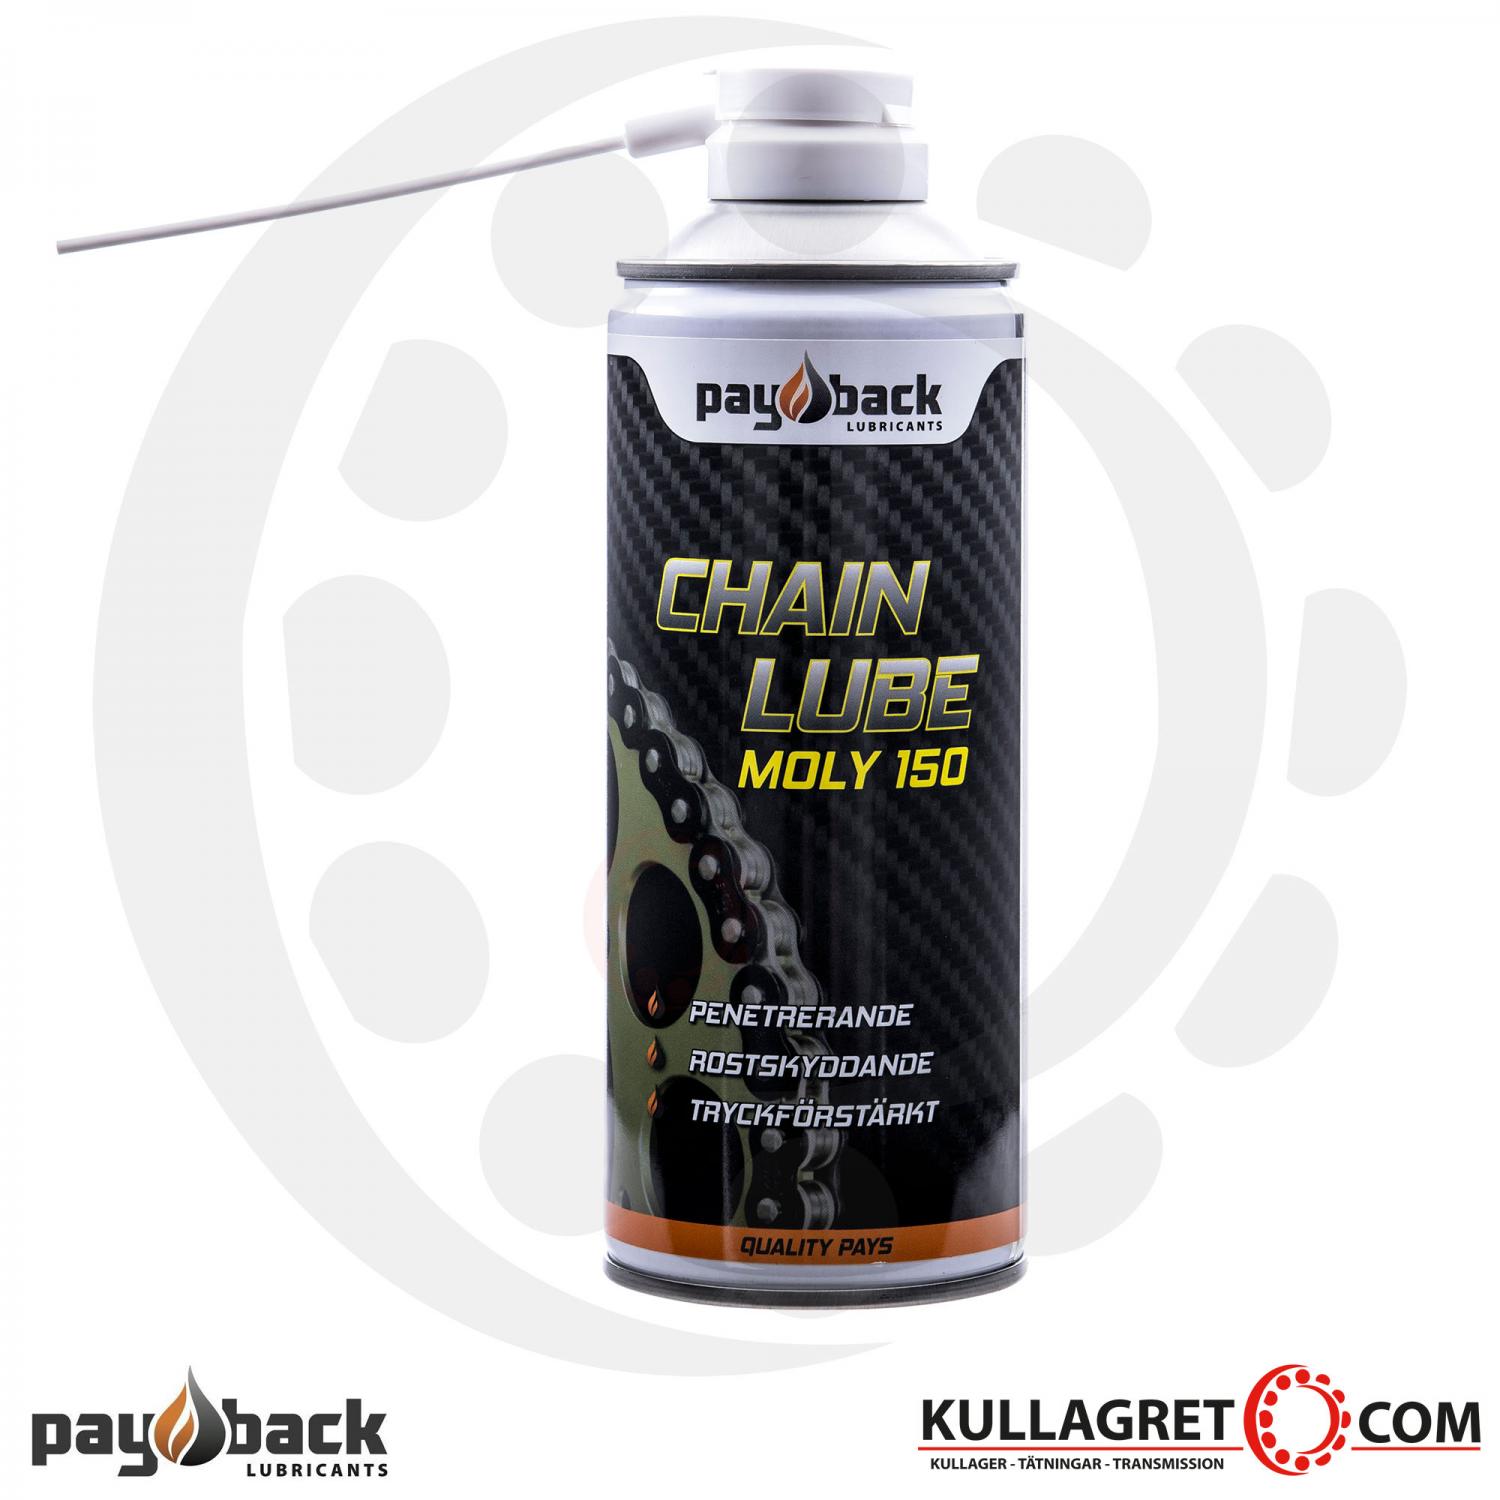 Payback #302 Moly Chain Lube VG 150